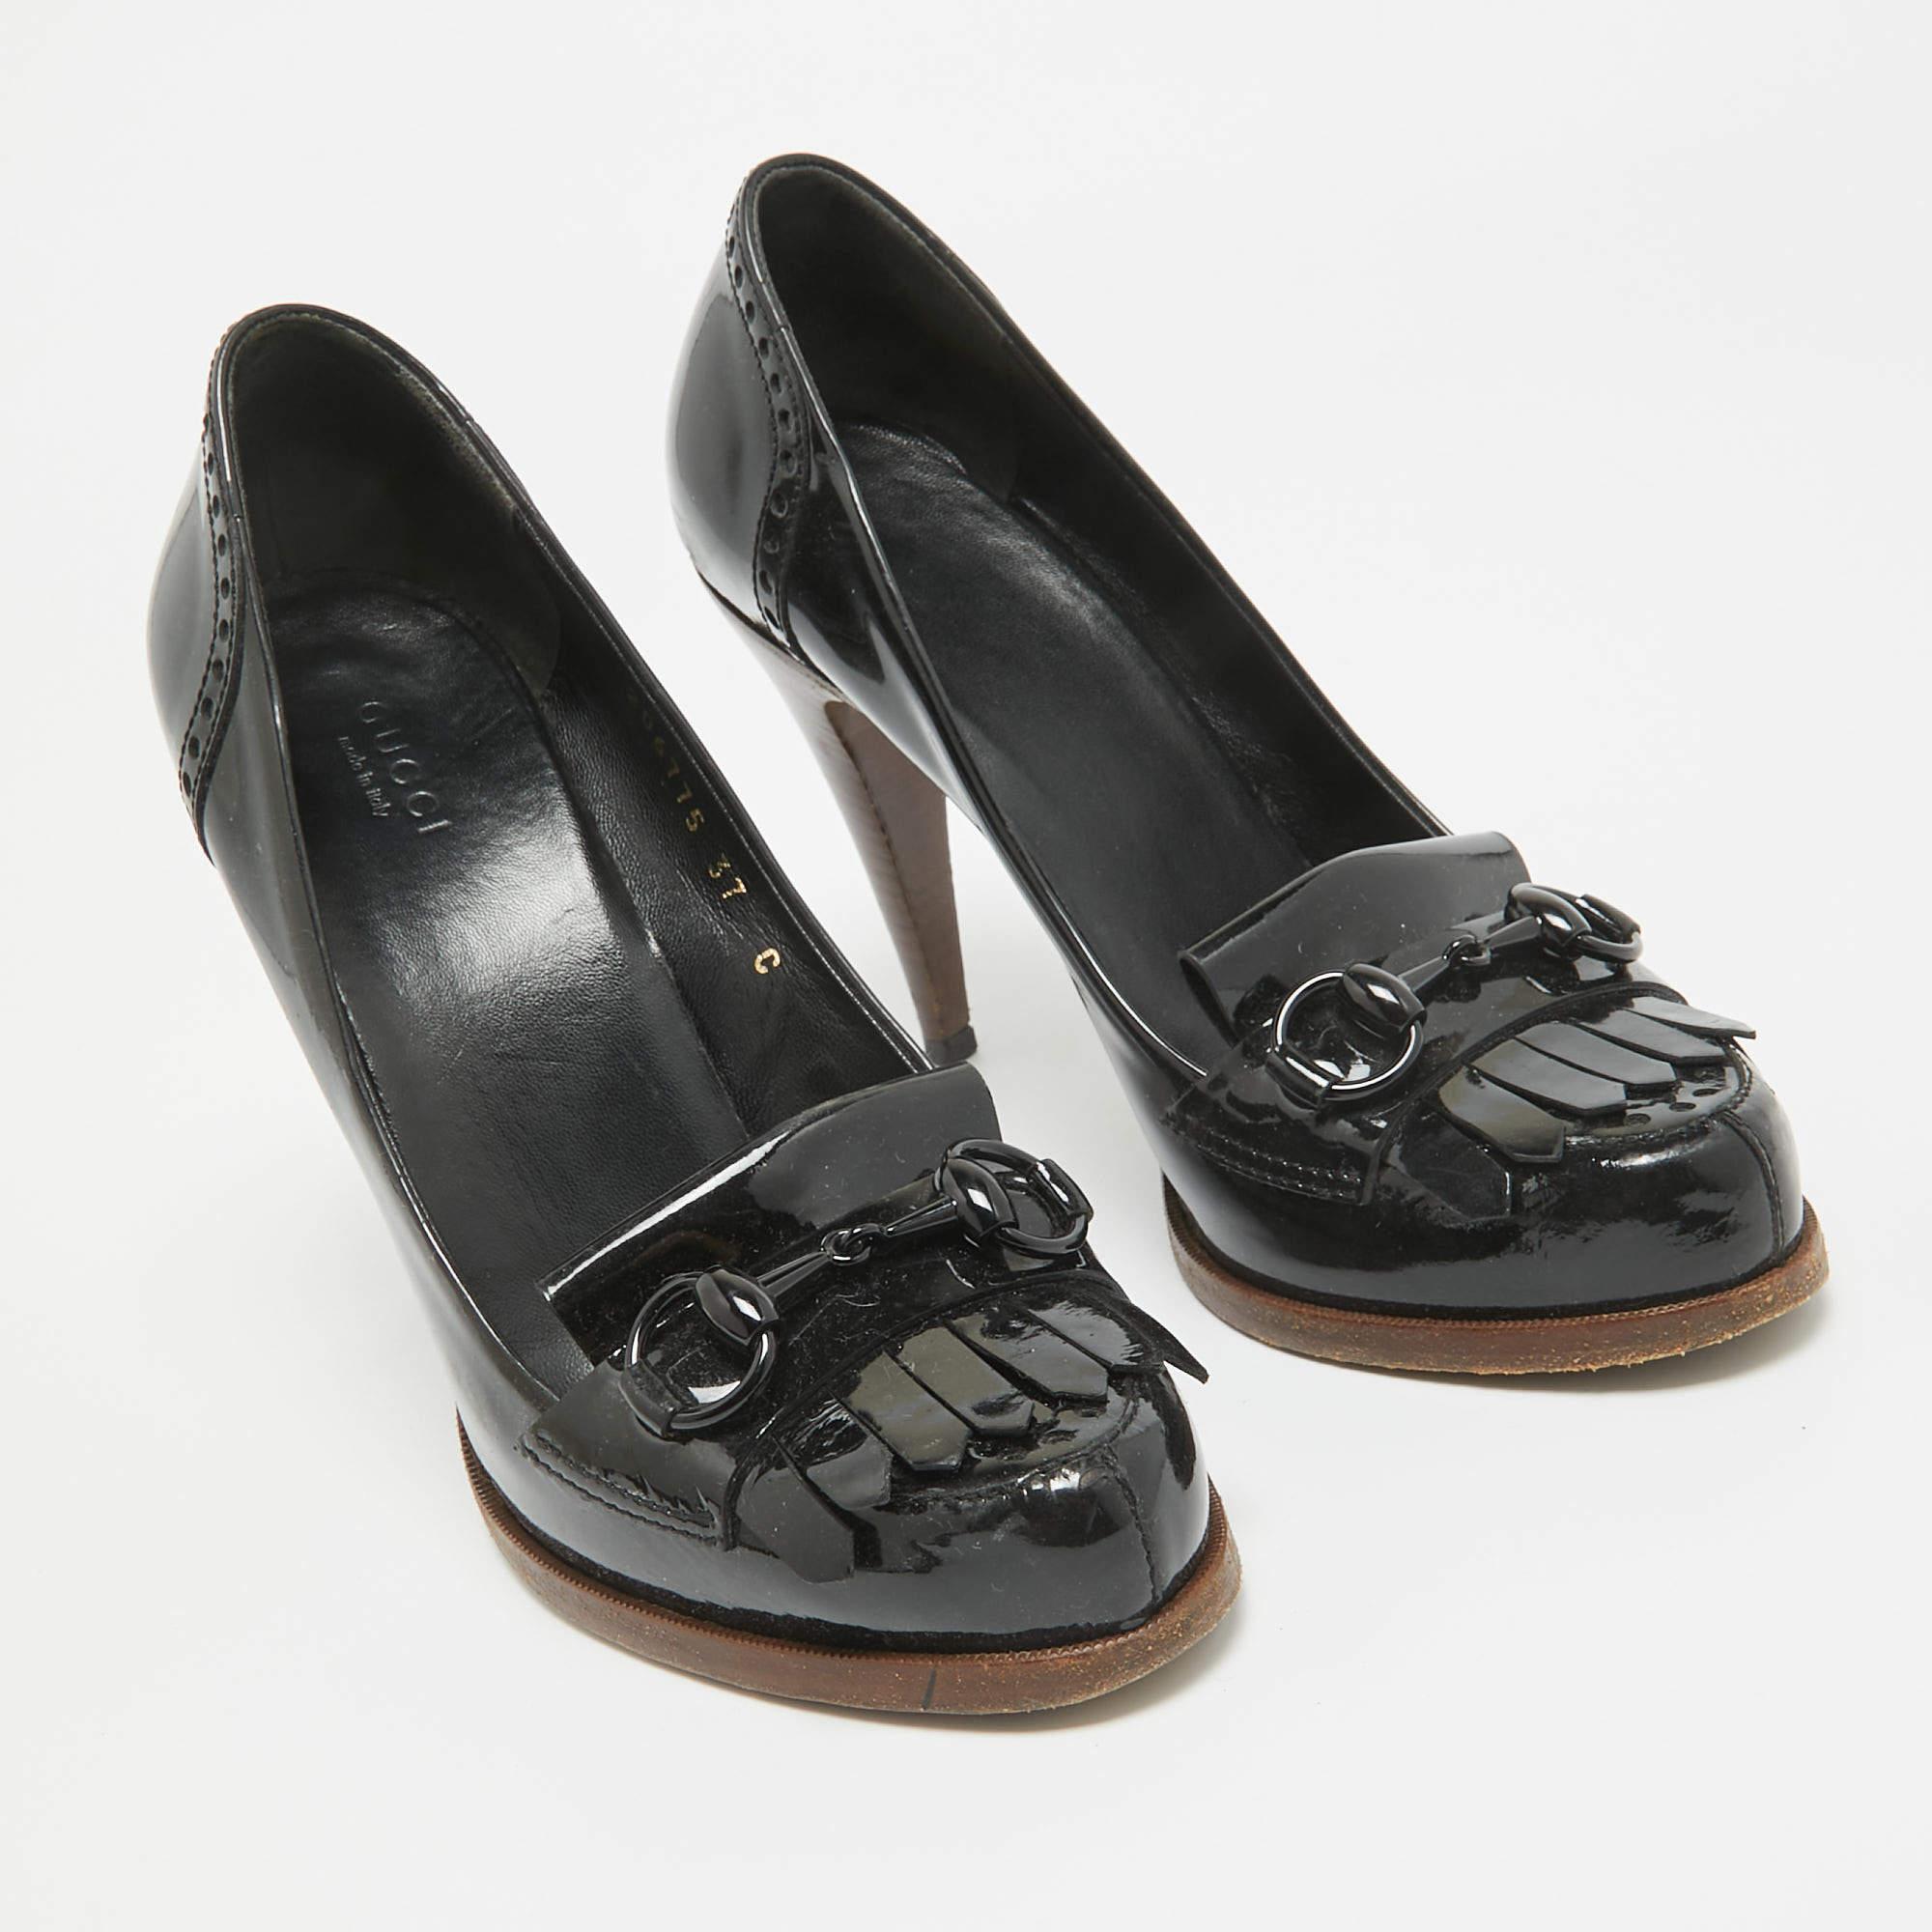 Gucci Black Patent Leather Loafers Pumps Size 37 For Sale 1